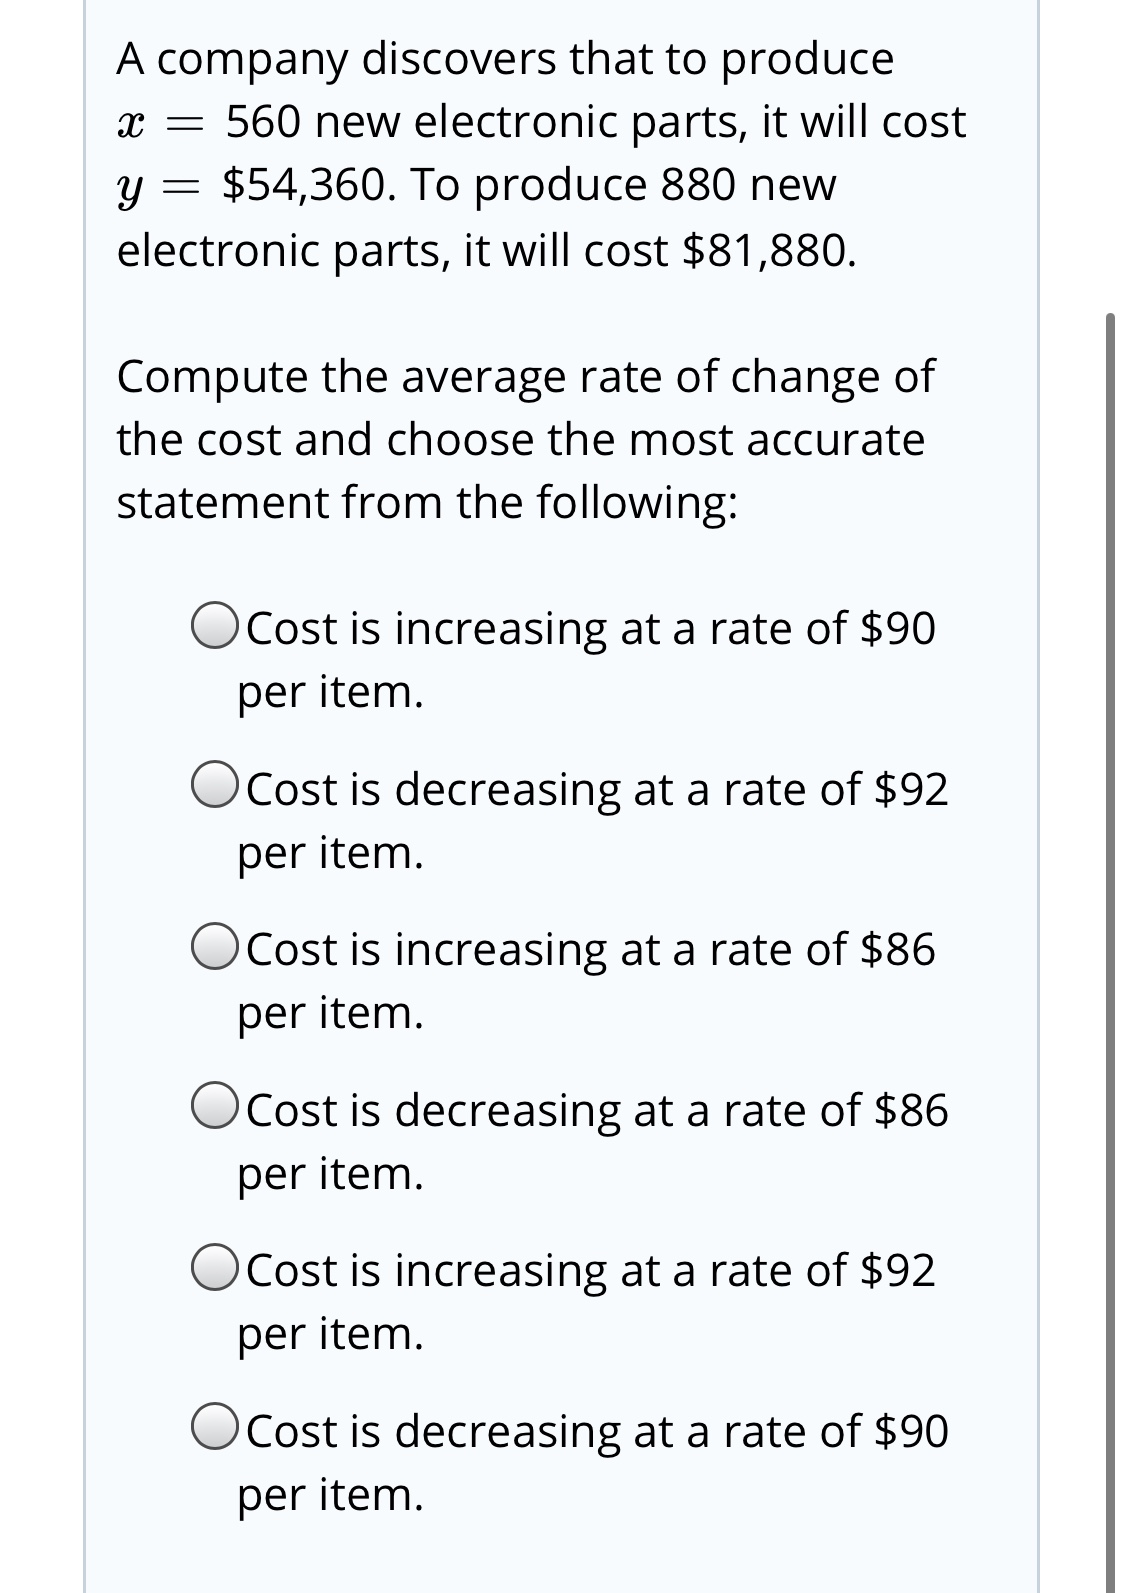 A company discovers that to produce
x = 560 new electronic parts, it will cost
y = $54,360. To produce 880 new
electronic parts, it will cost $81,880.
Compute the average rate of change of
the cost and choose the most accurate
statement from the following:
OCost is increasing at a rate of $90
per item.
Cost is decreasing at a rate of $92
per item.
OCost is increasing at a rate of $86
per item.
OCost is decreasing at a rate of $86
per item.
OCost is increasing at a rate of $92
per item.
OCost is decreasing at a rate of $90
per item.
